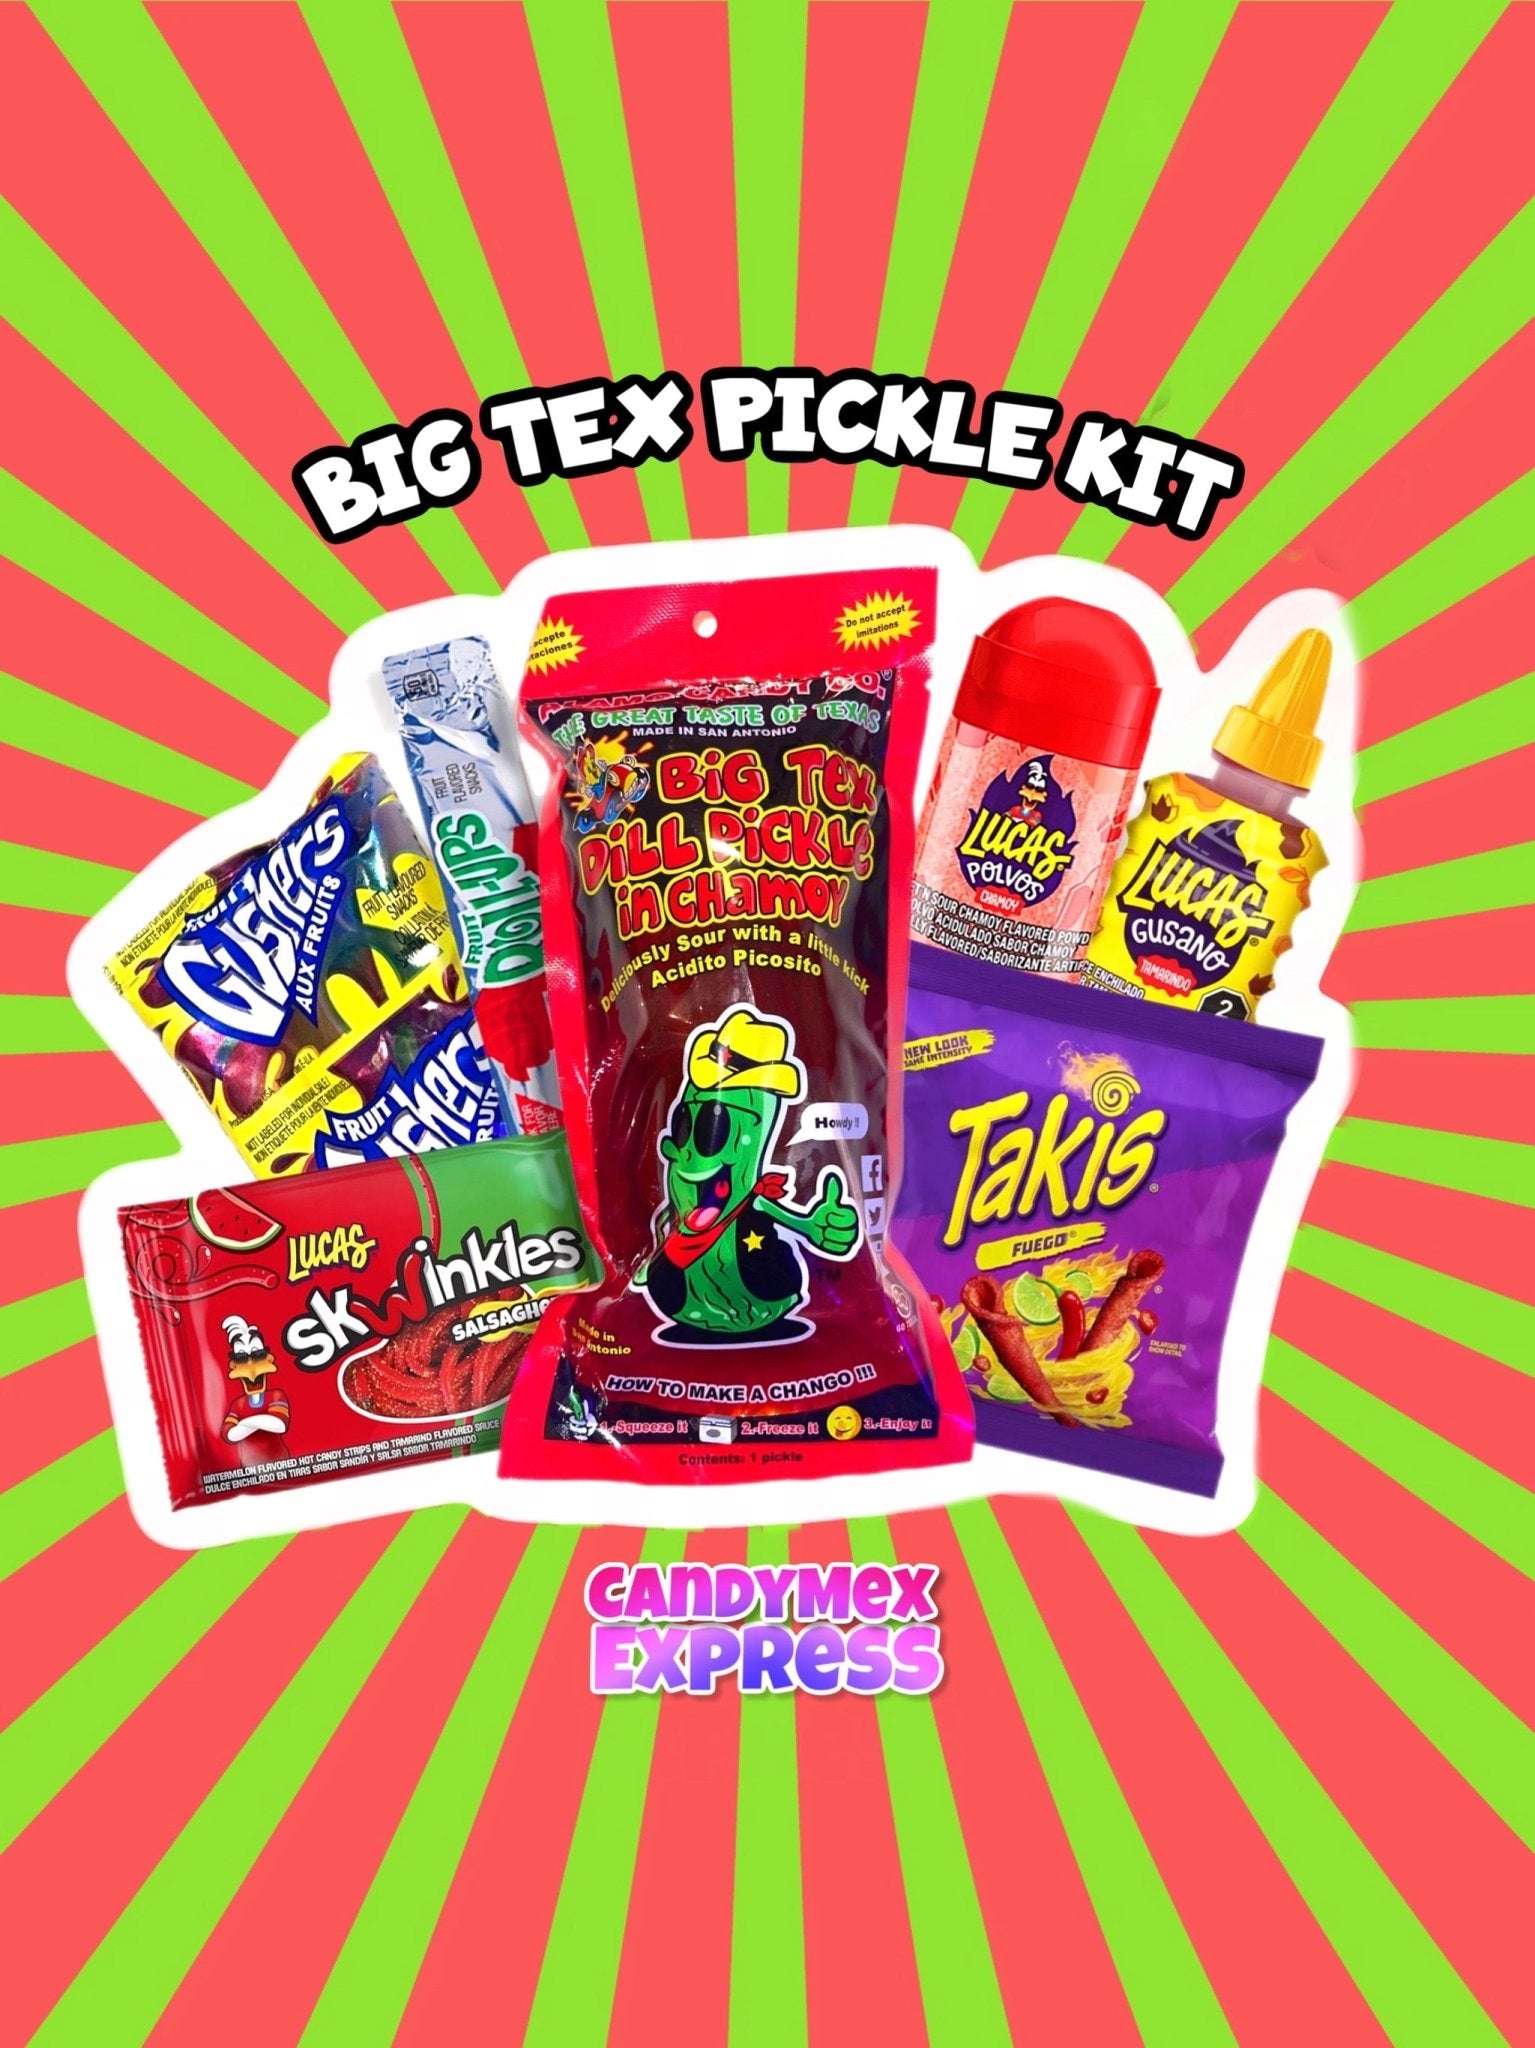 Discover Flavorful Delights with Our Chamoy Pickle Kit! - CandyMex Express